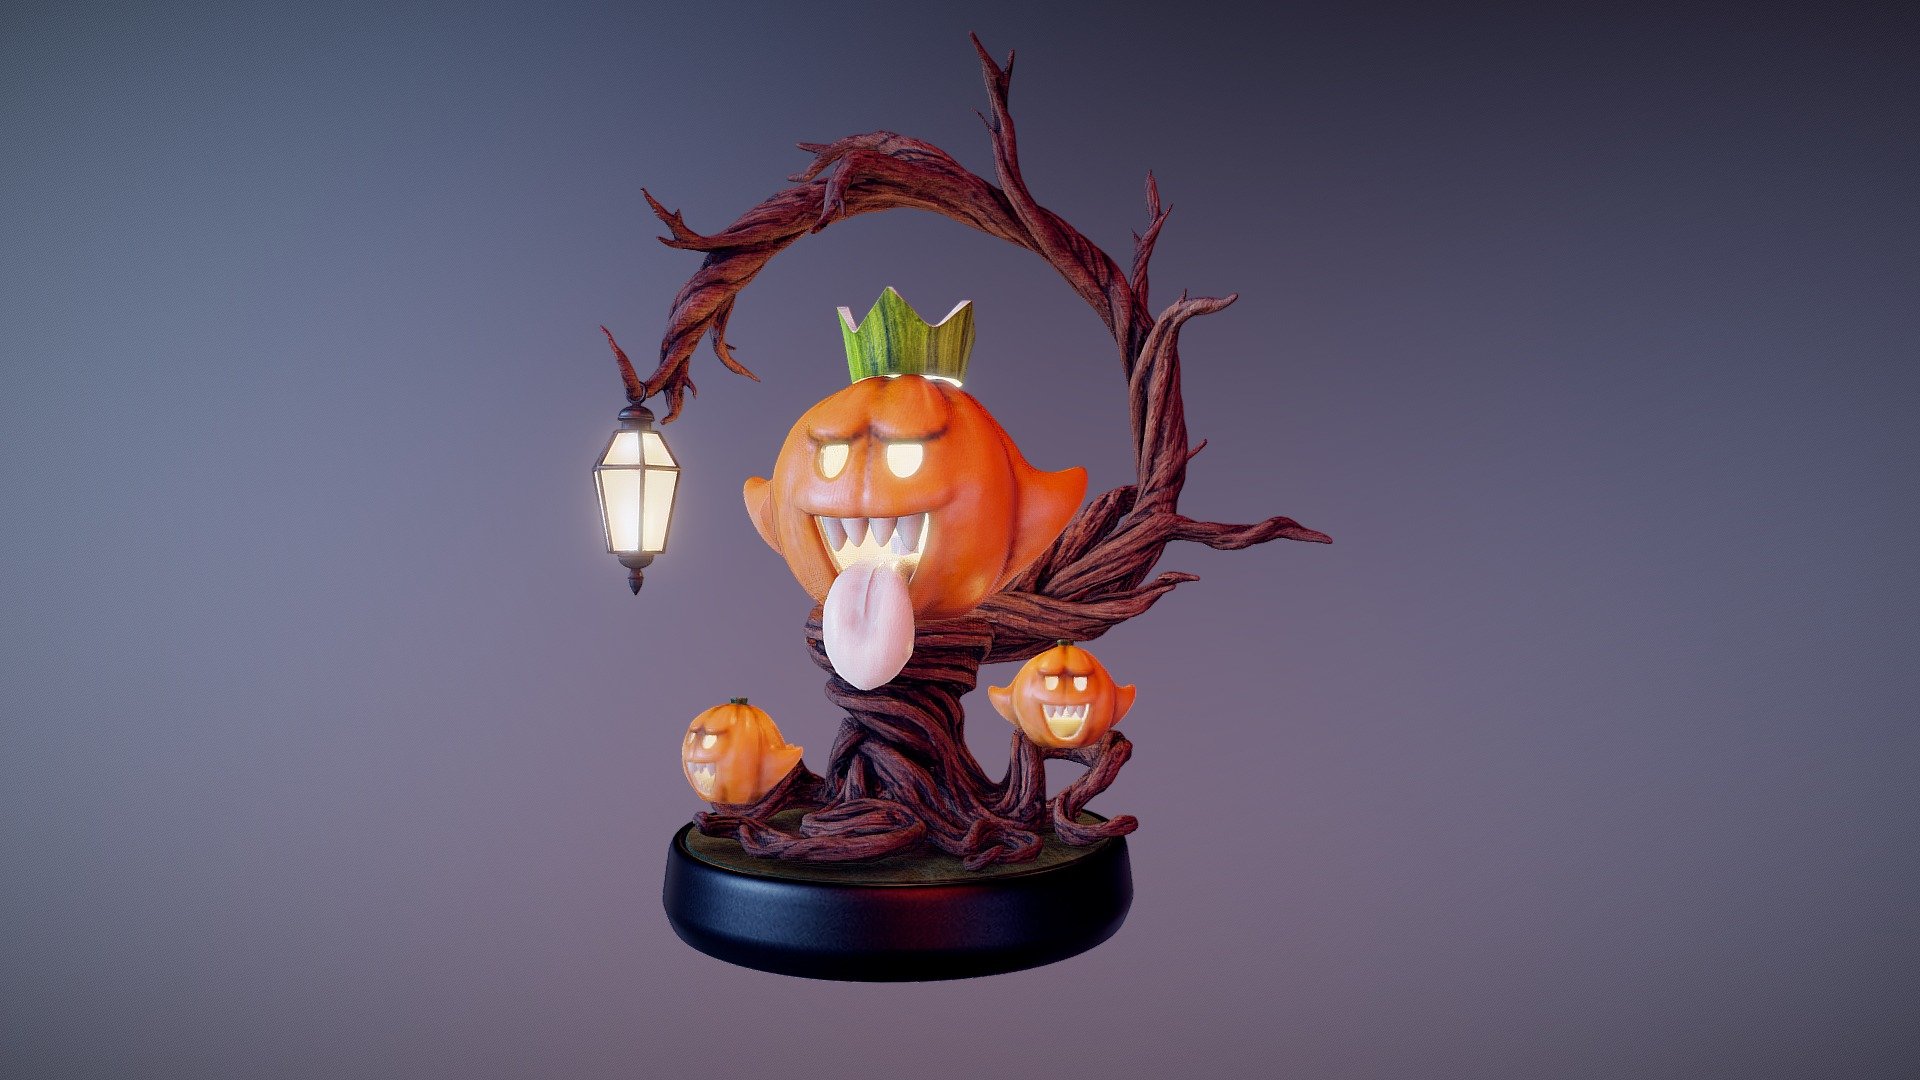 This is my entry to the Pumpkin Carving Challenge! 
Based on “Pumpkin” by Maurice Svay, licensed under Creative Commons Attribution.

The main goal was to sculpt an existing pumpkin model, and create whatever we wanted, with total freedom!
So I sculpted King Boo, from Super Mario series, as an amiibo, trying to create something that's funny and spooky at the same time.
Hope you like it! - Pumpking Boo - 3D model by thiagosaraiva 3d model